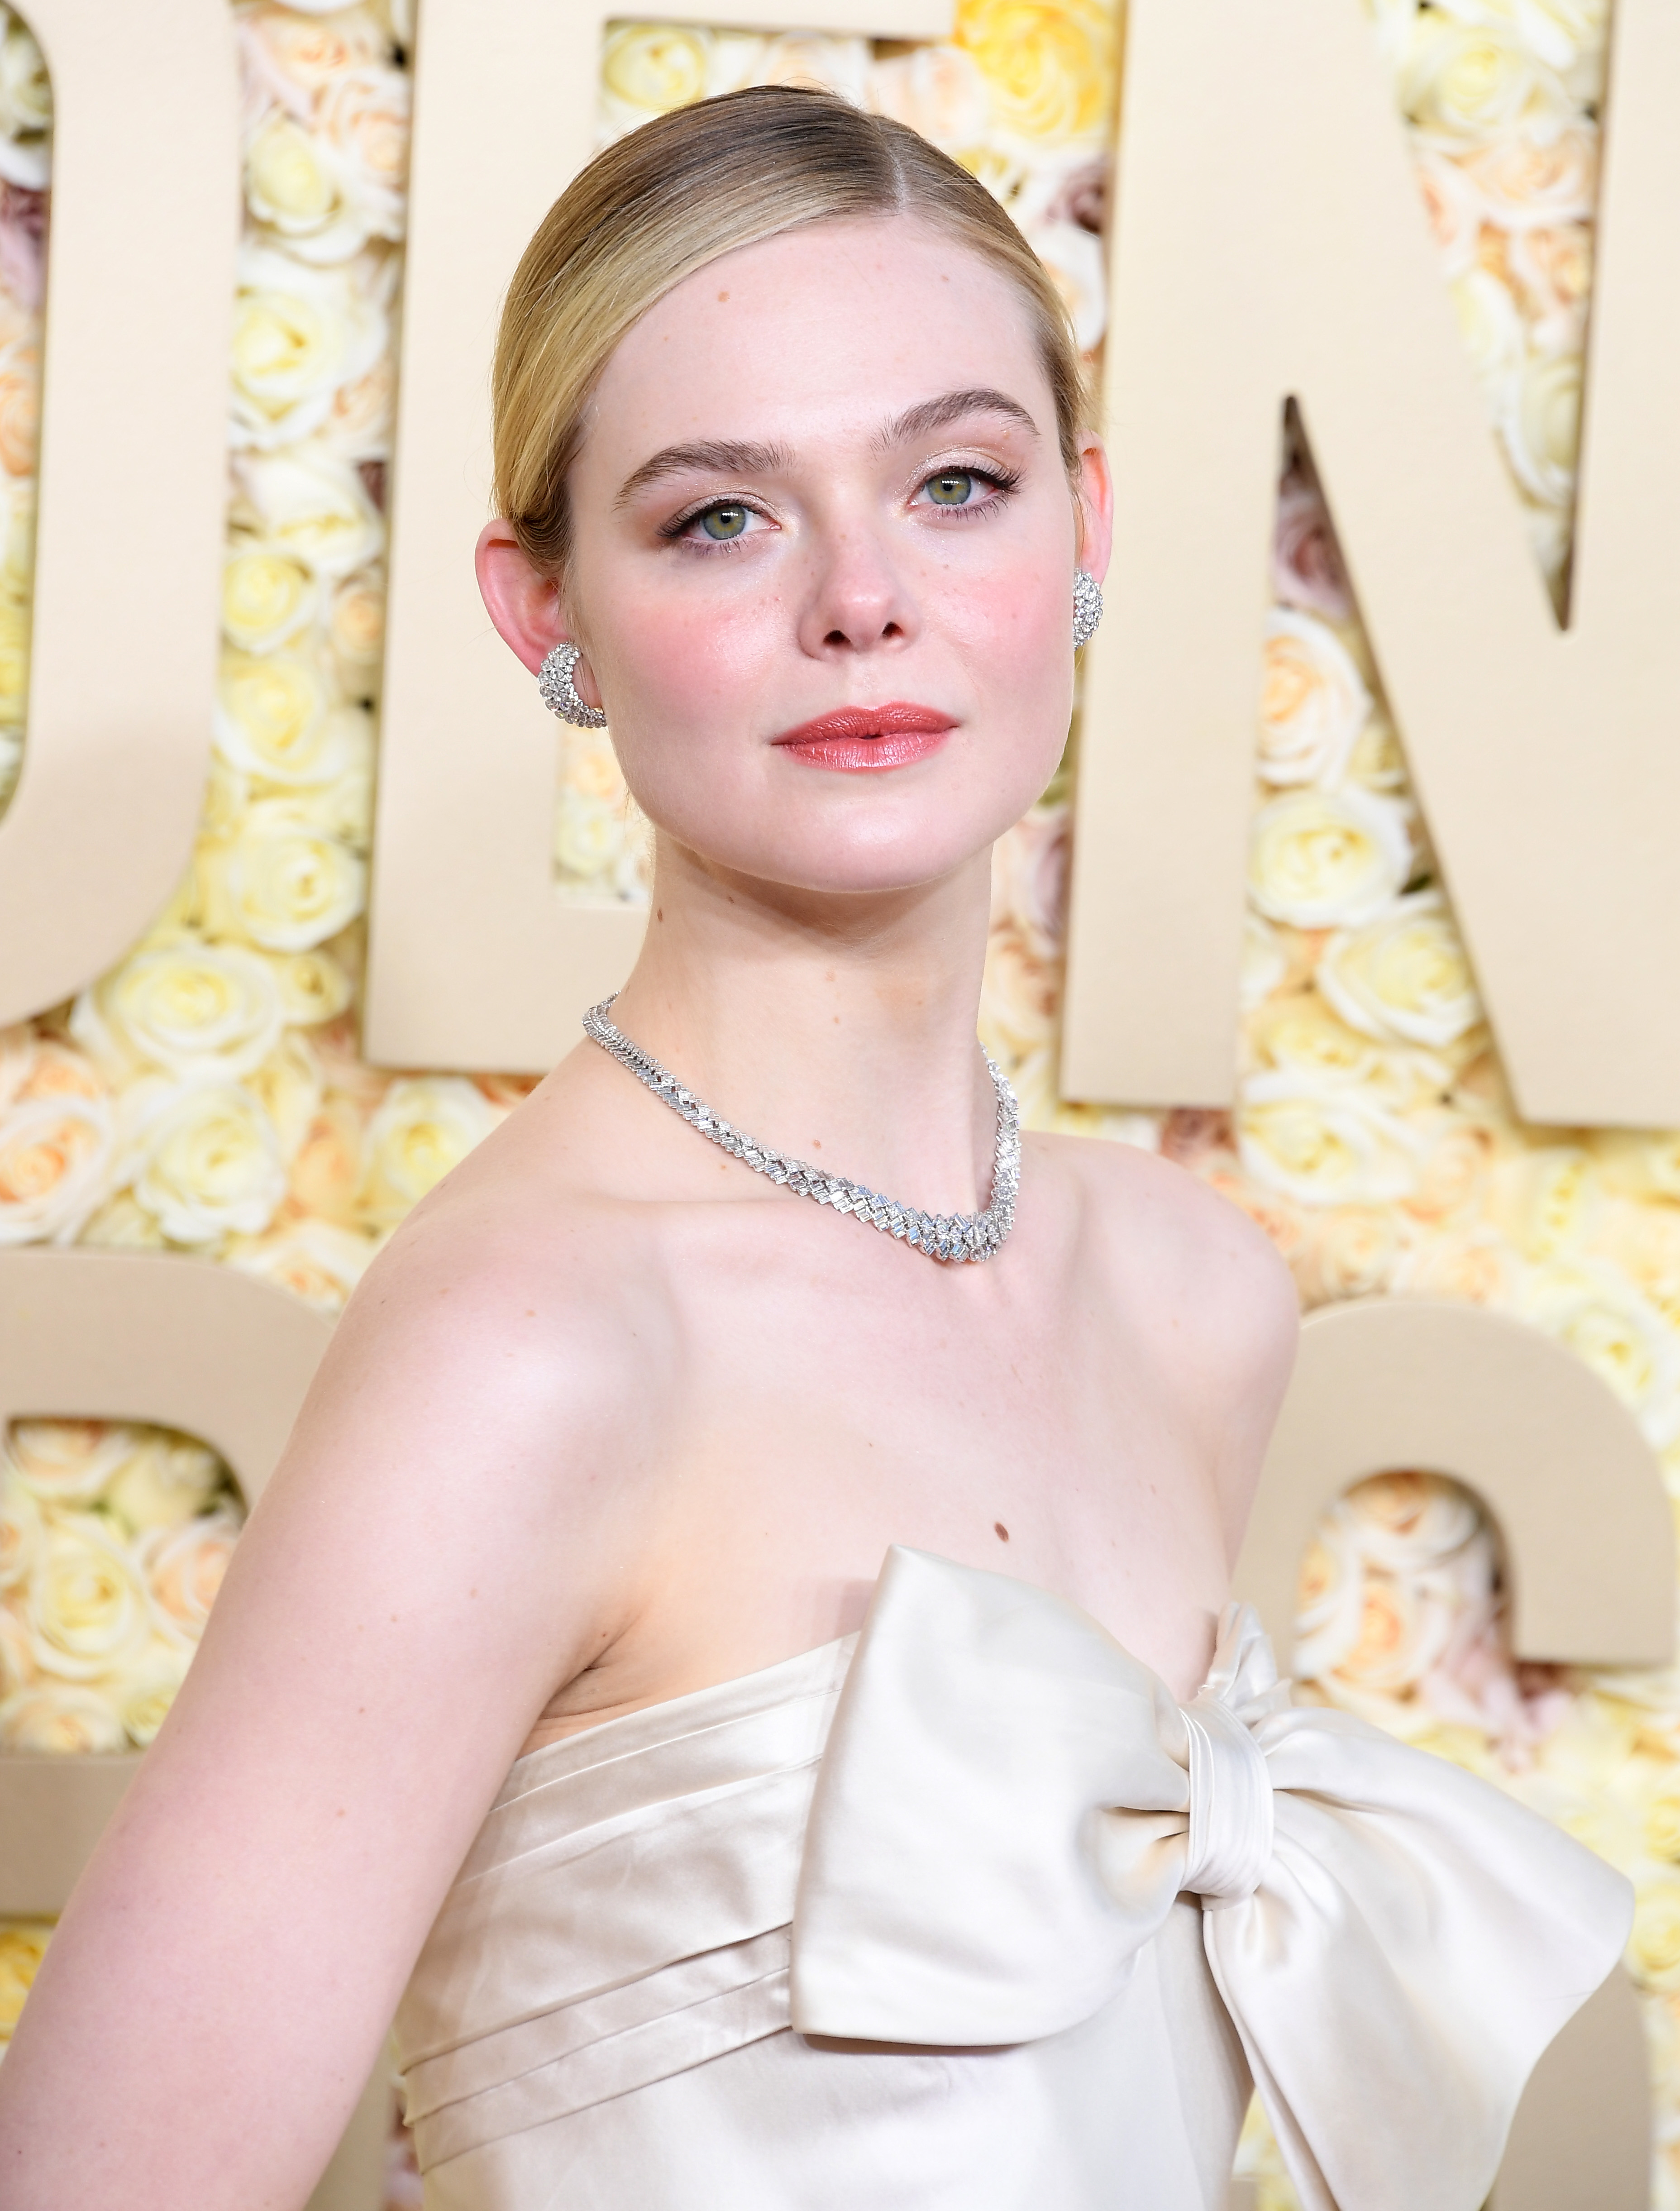 Elle Fanning in an off-shoulder gown with a bow detail, diamond necklace, and earrings at an event